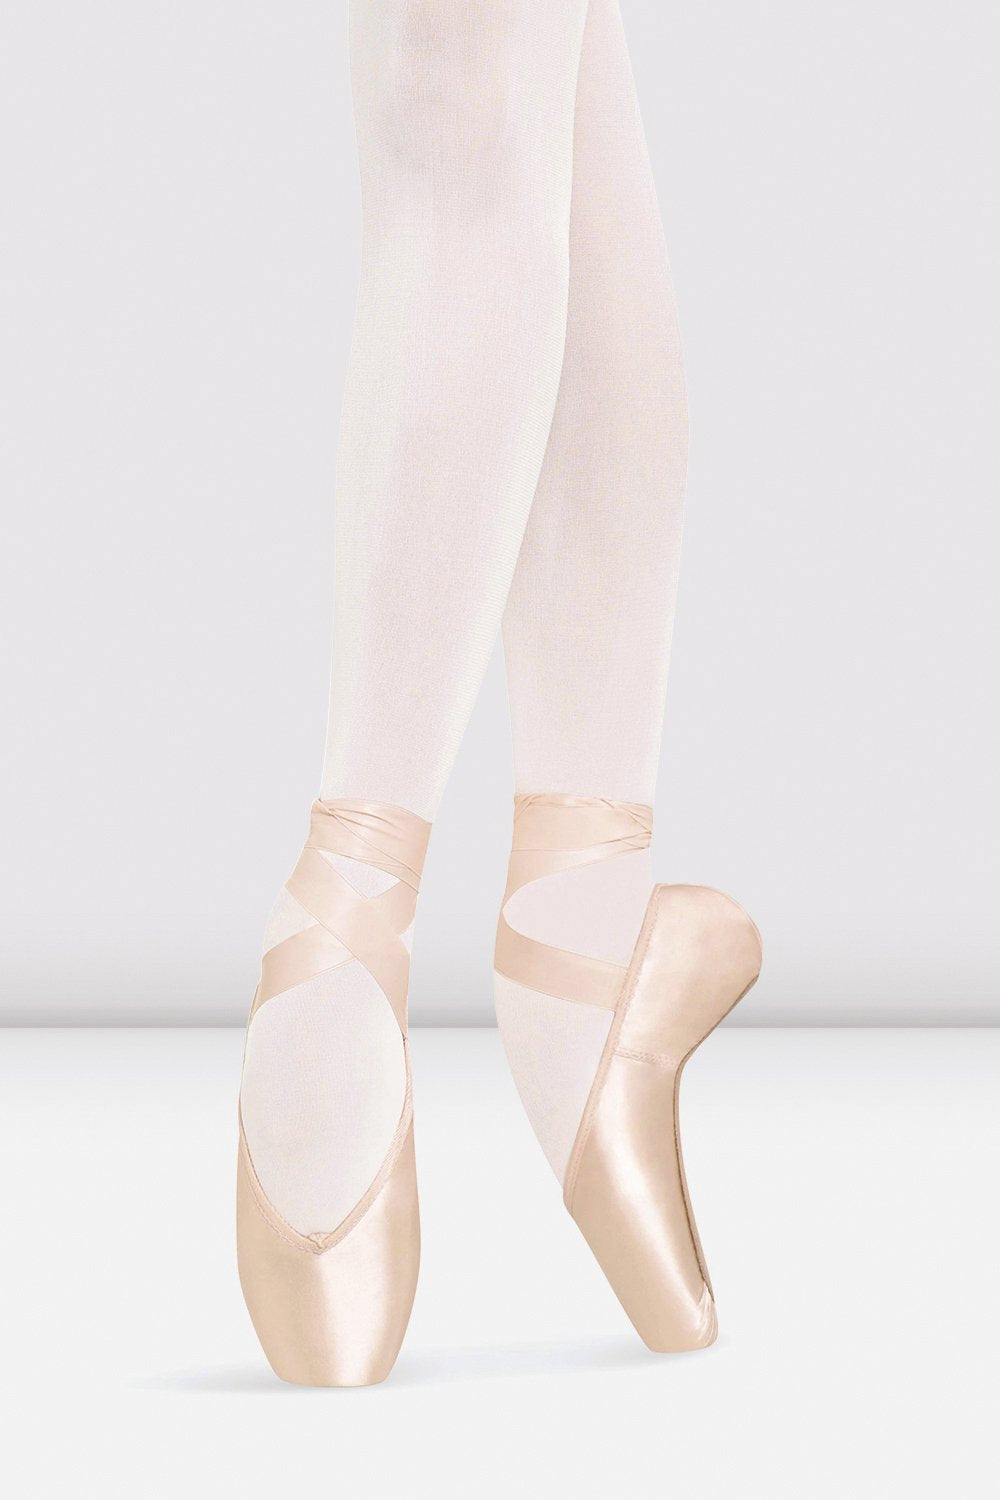 Silky Dance Contemporary shoes  Dancewear at Wholesale Prices